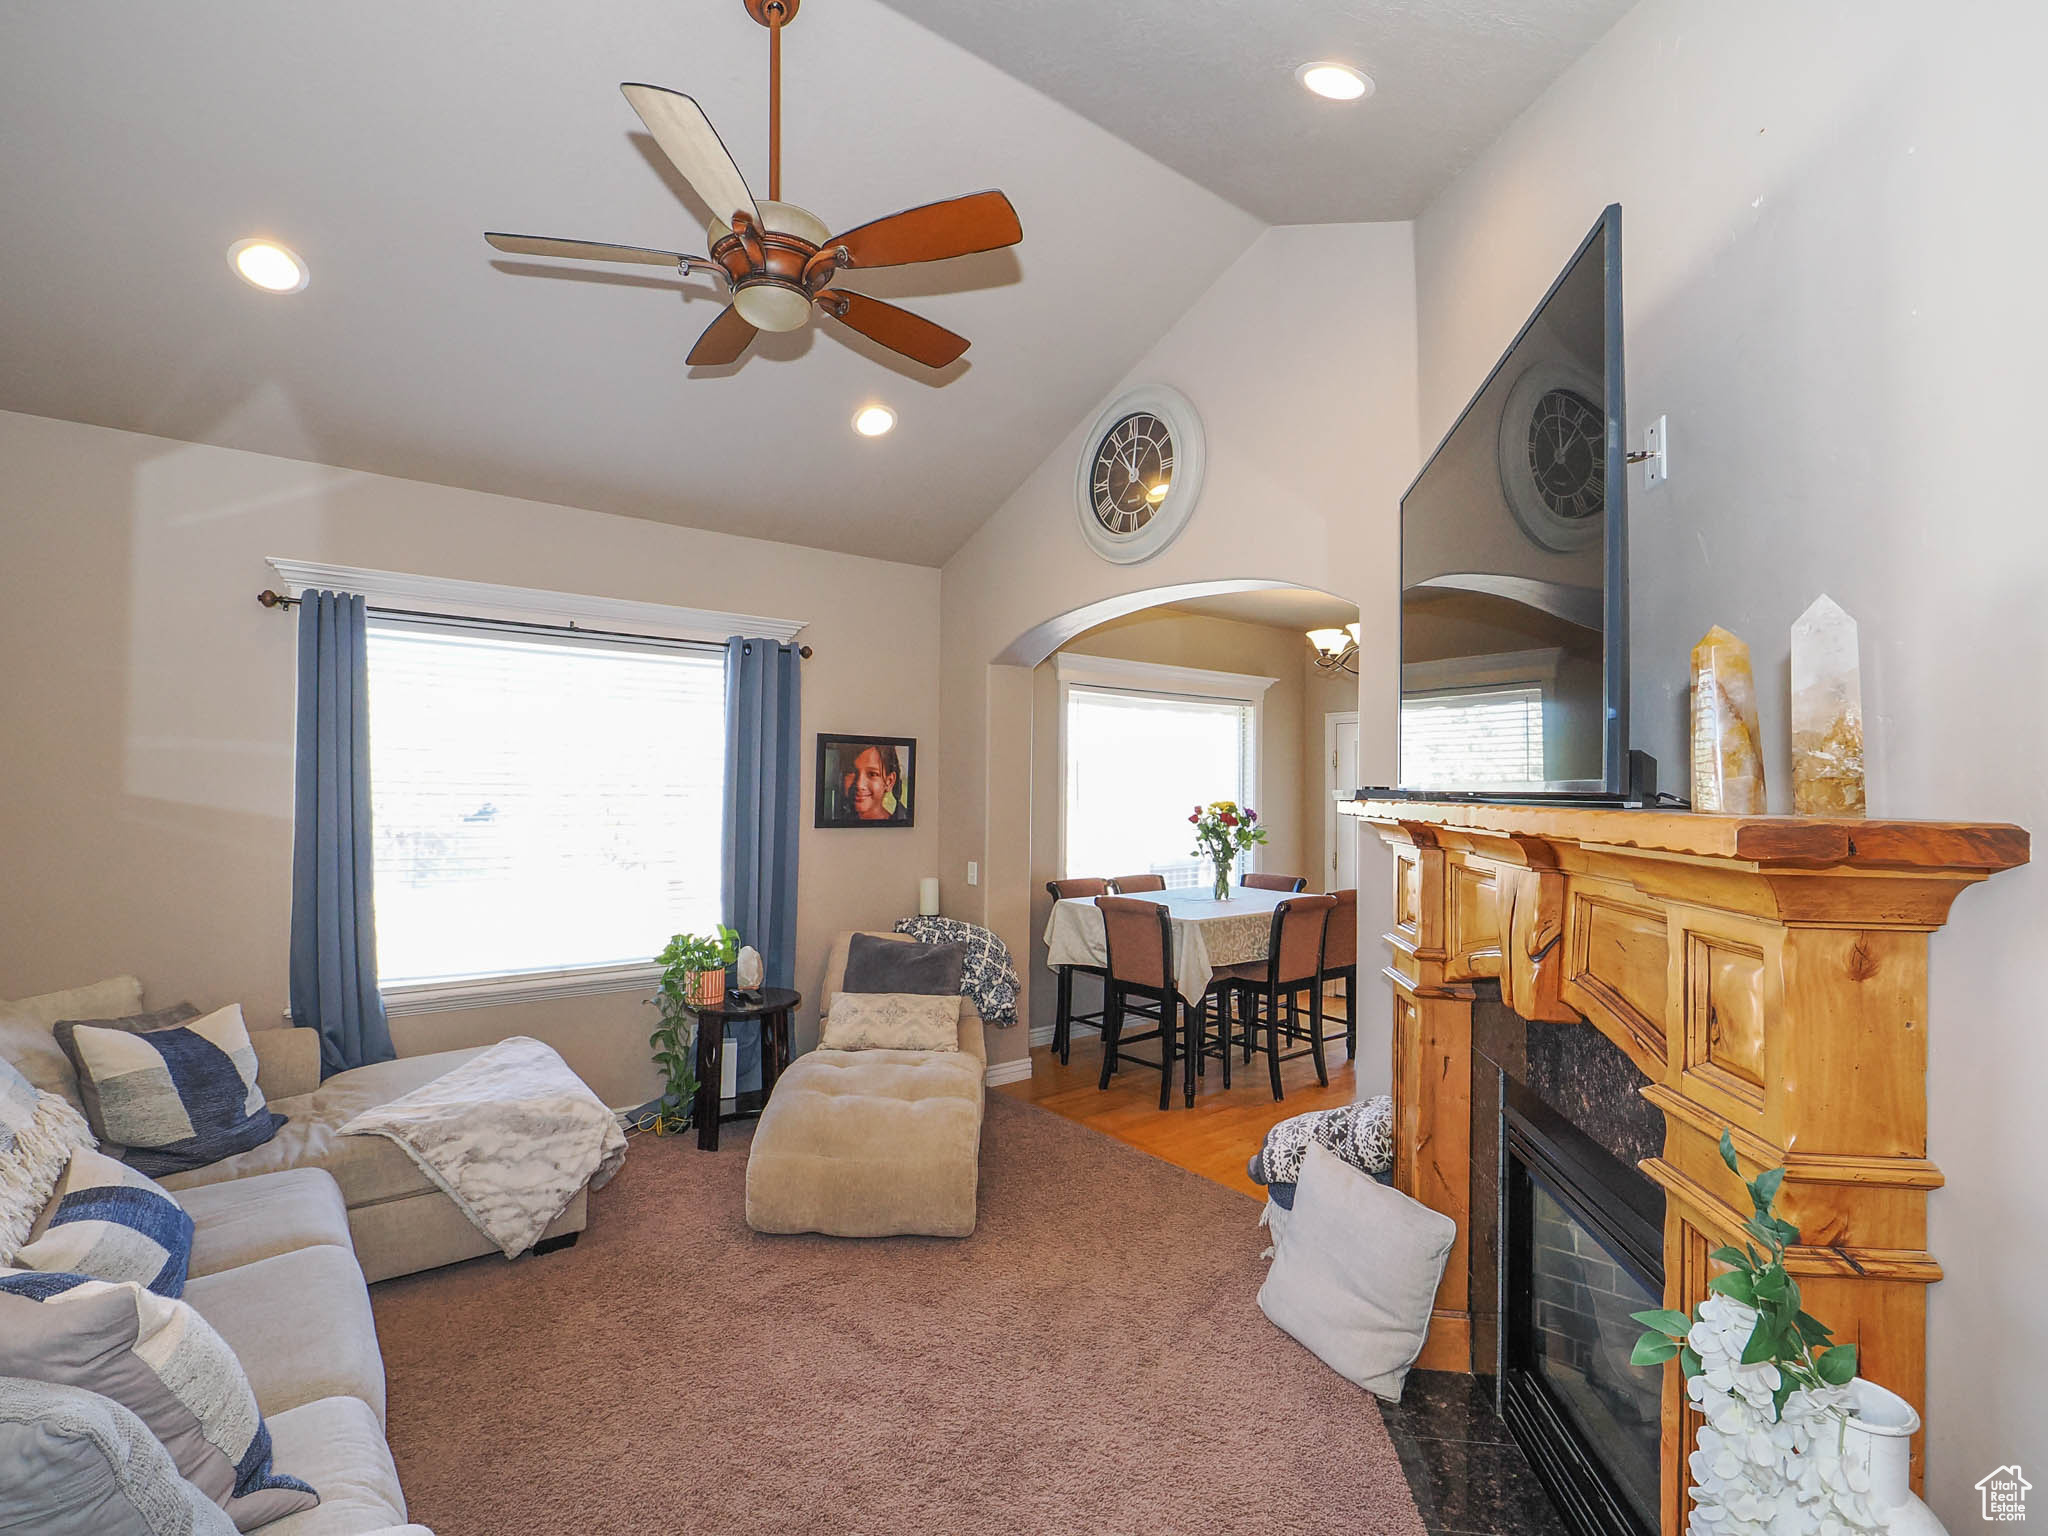 Family room featuring high vaulted ceiling, ceiling fan, carpet floors, and a fireplace